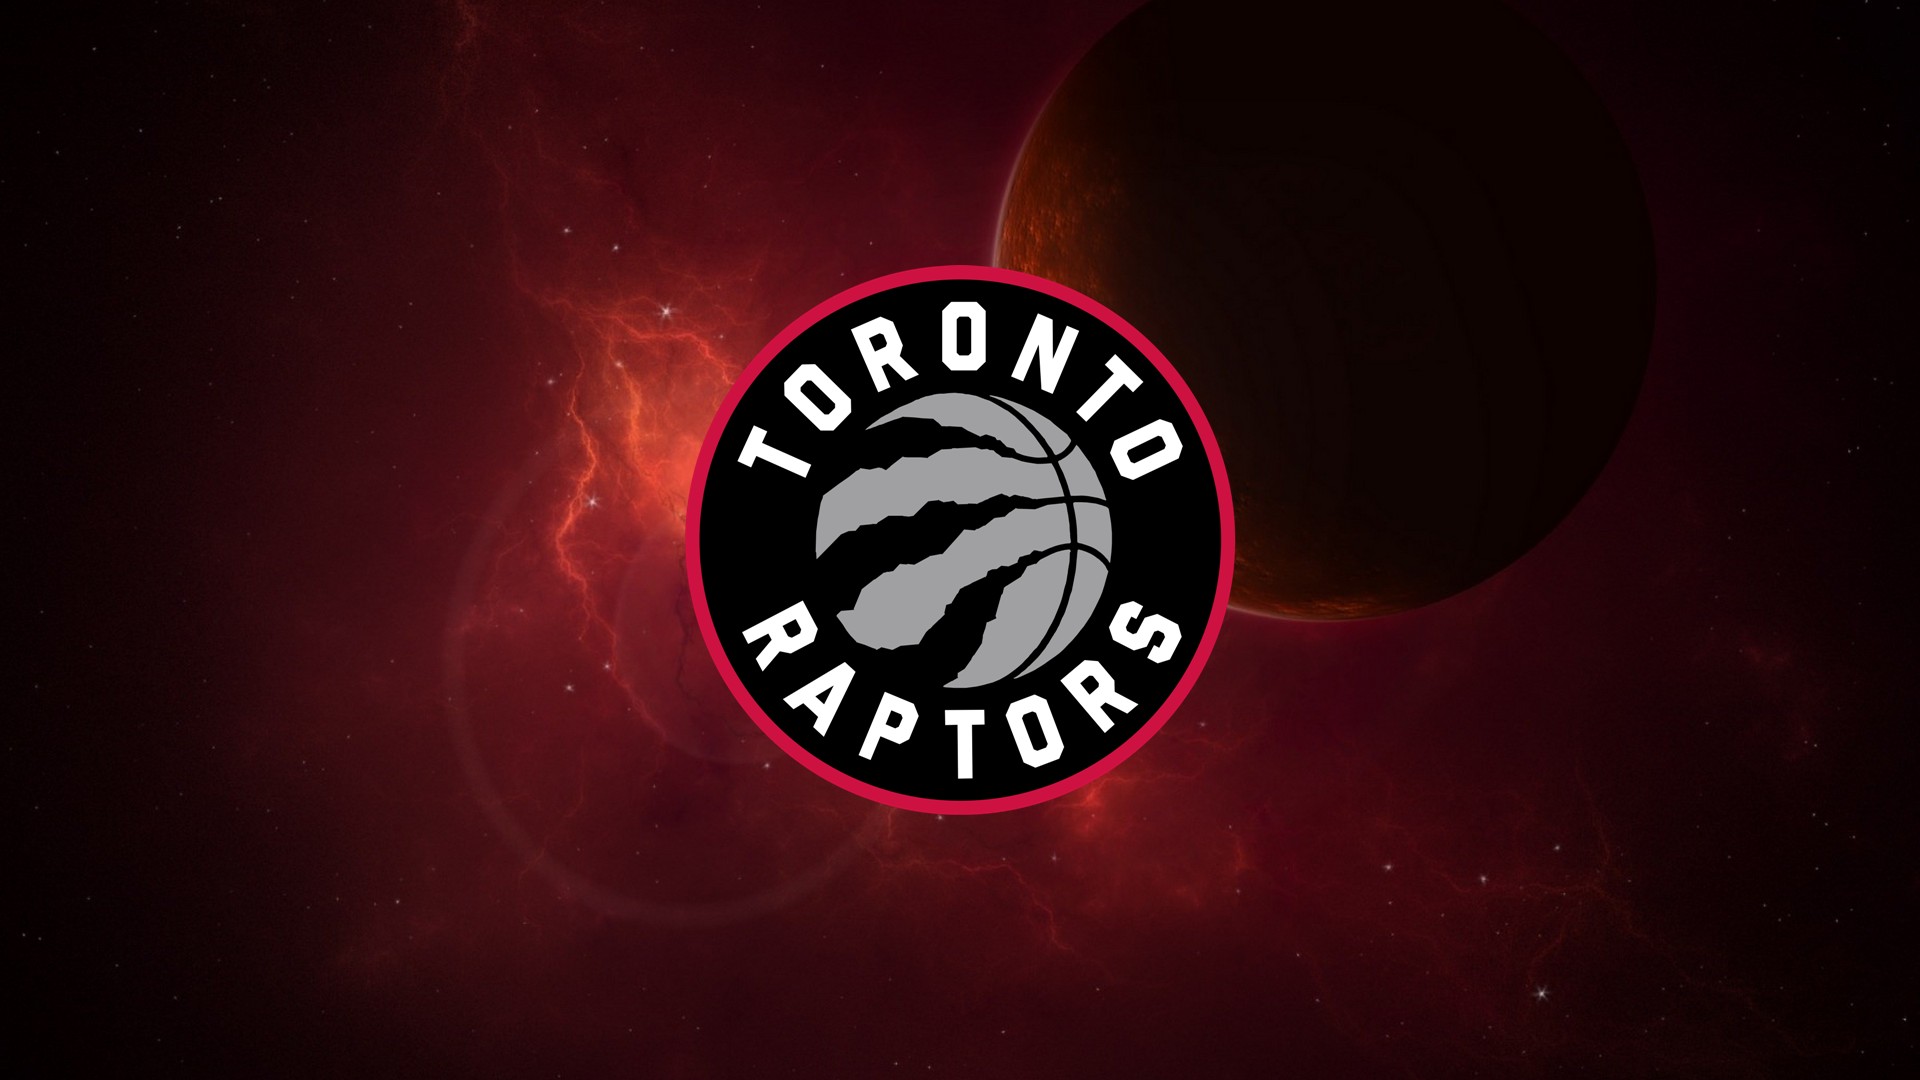 HD Basketball Toronto Backgrounds with image dimensions 1920x1080 pixel. You can make this wallpaper for your Desktop Computer Backgrounds, Windows or Mac Screensavers, iPhone Lock screen, Tablet or Android and another Mobile Phone device